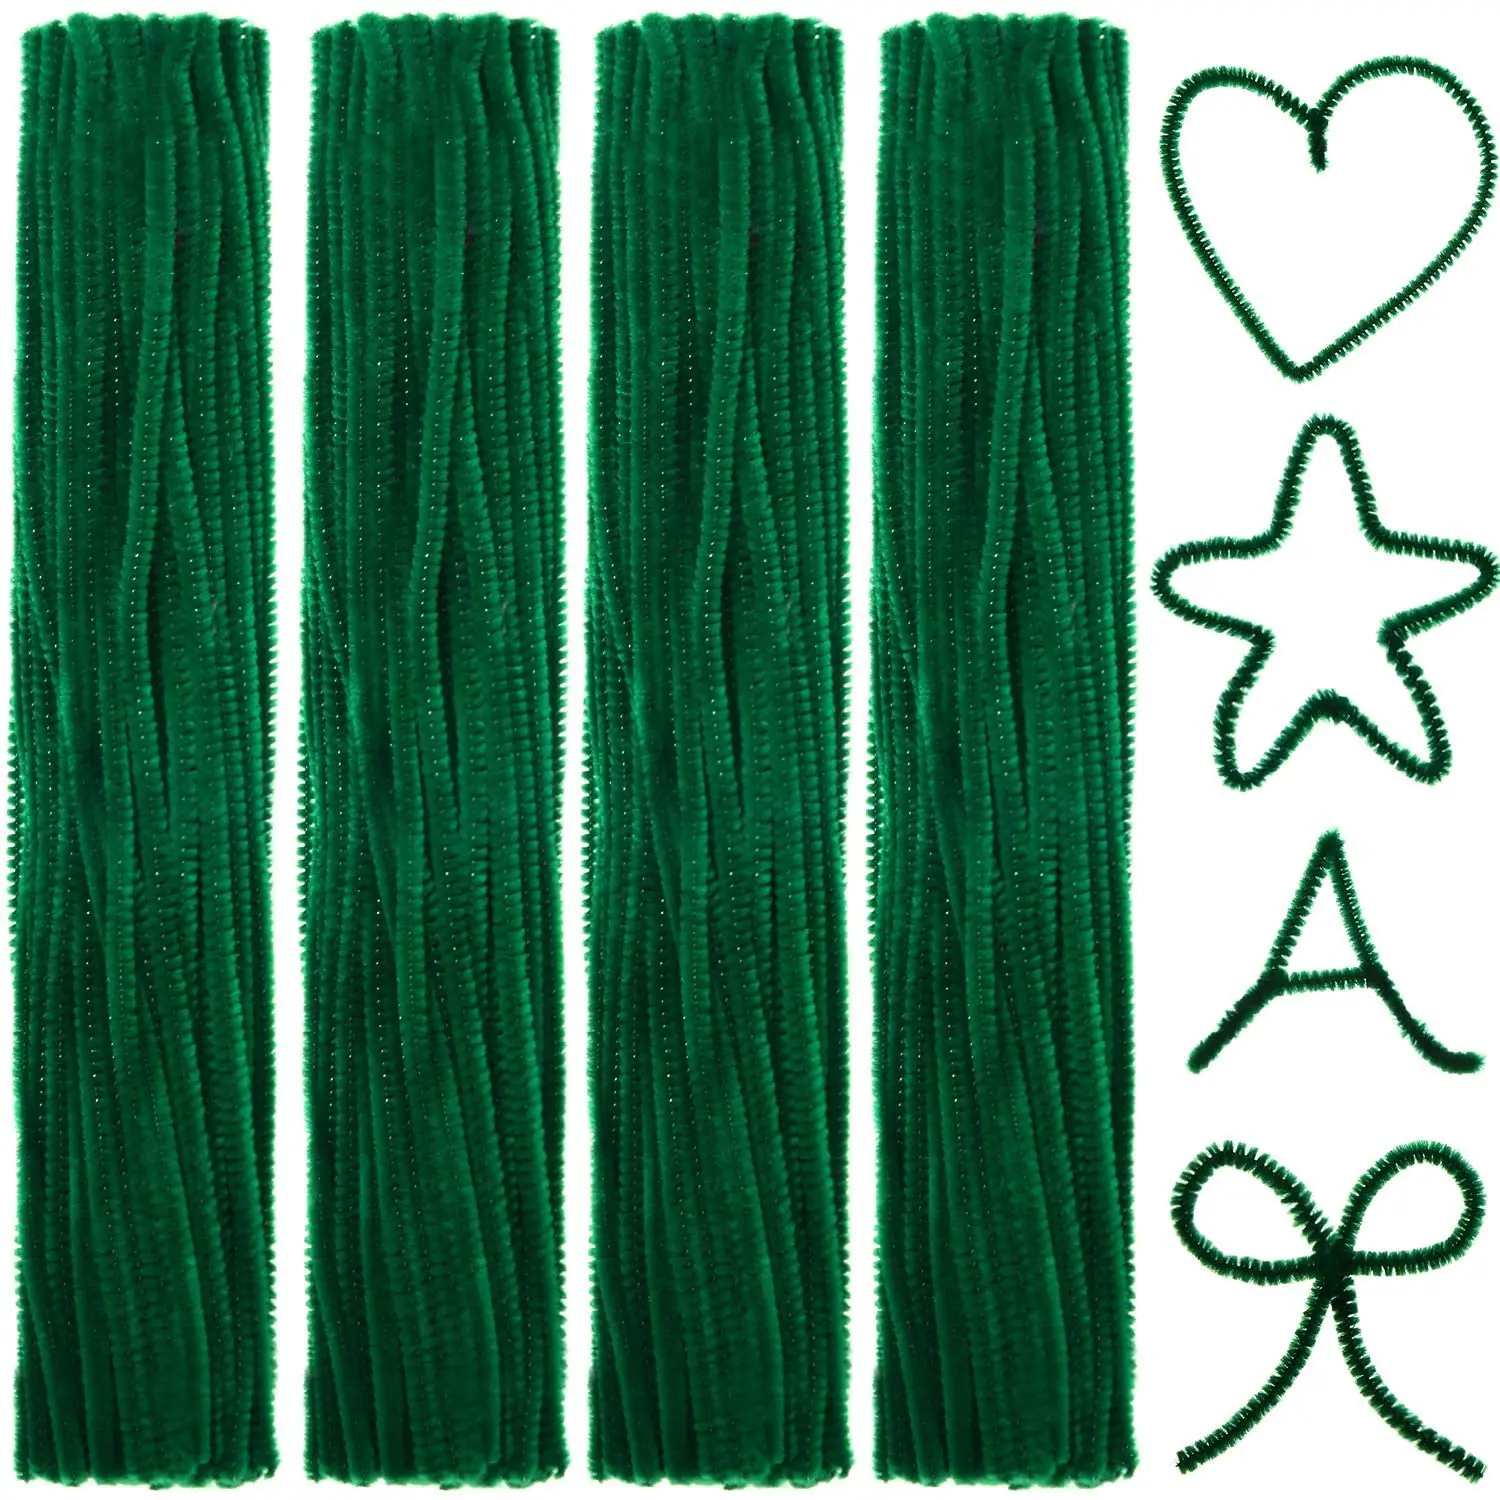 100pcs 6mm X 30cm Pipe Cleaners For Crafts Kids 10 Colours Soft Bristle,  Flexible Craft Pipe Cleaners Diy Art Decorations